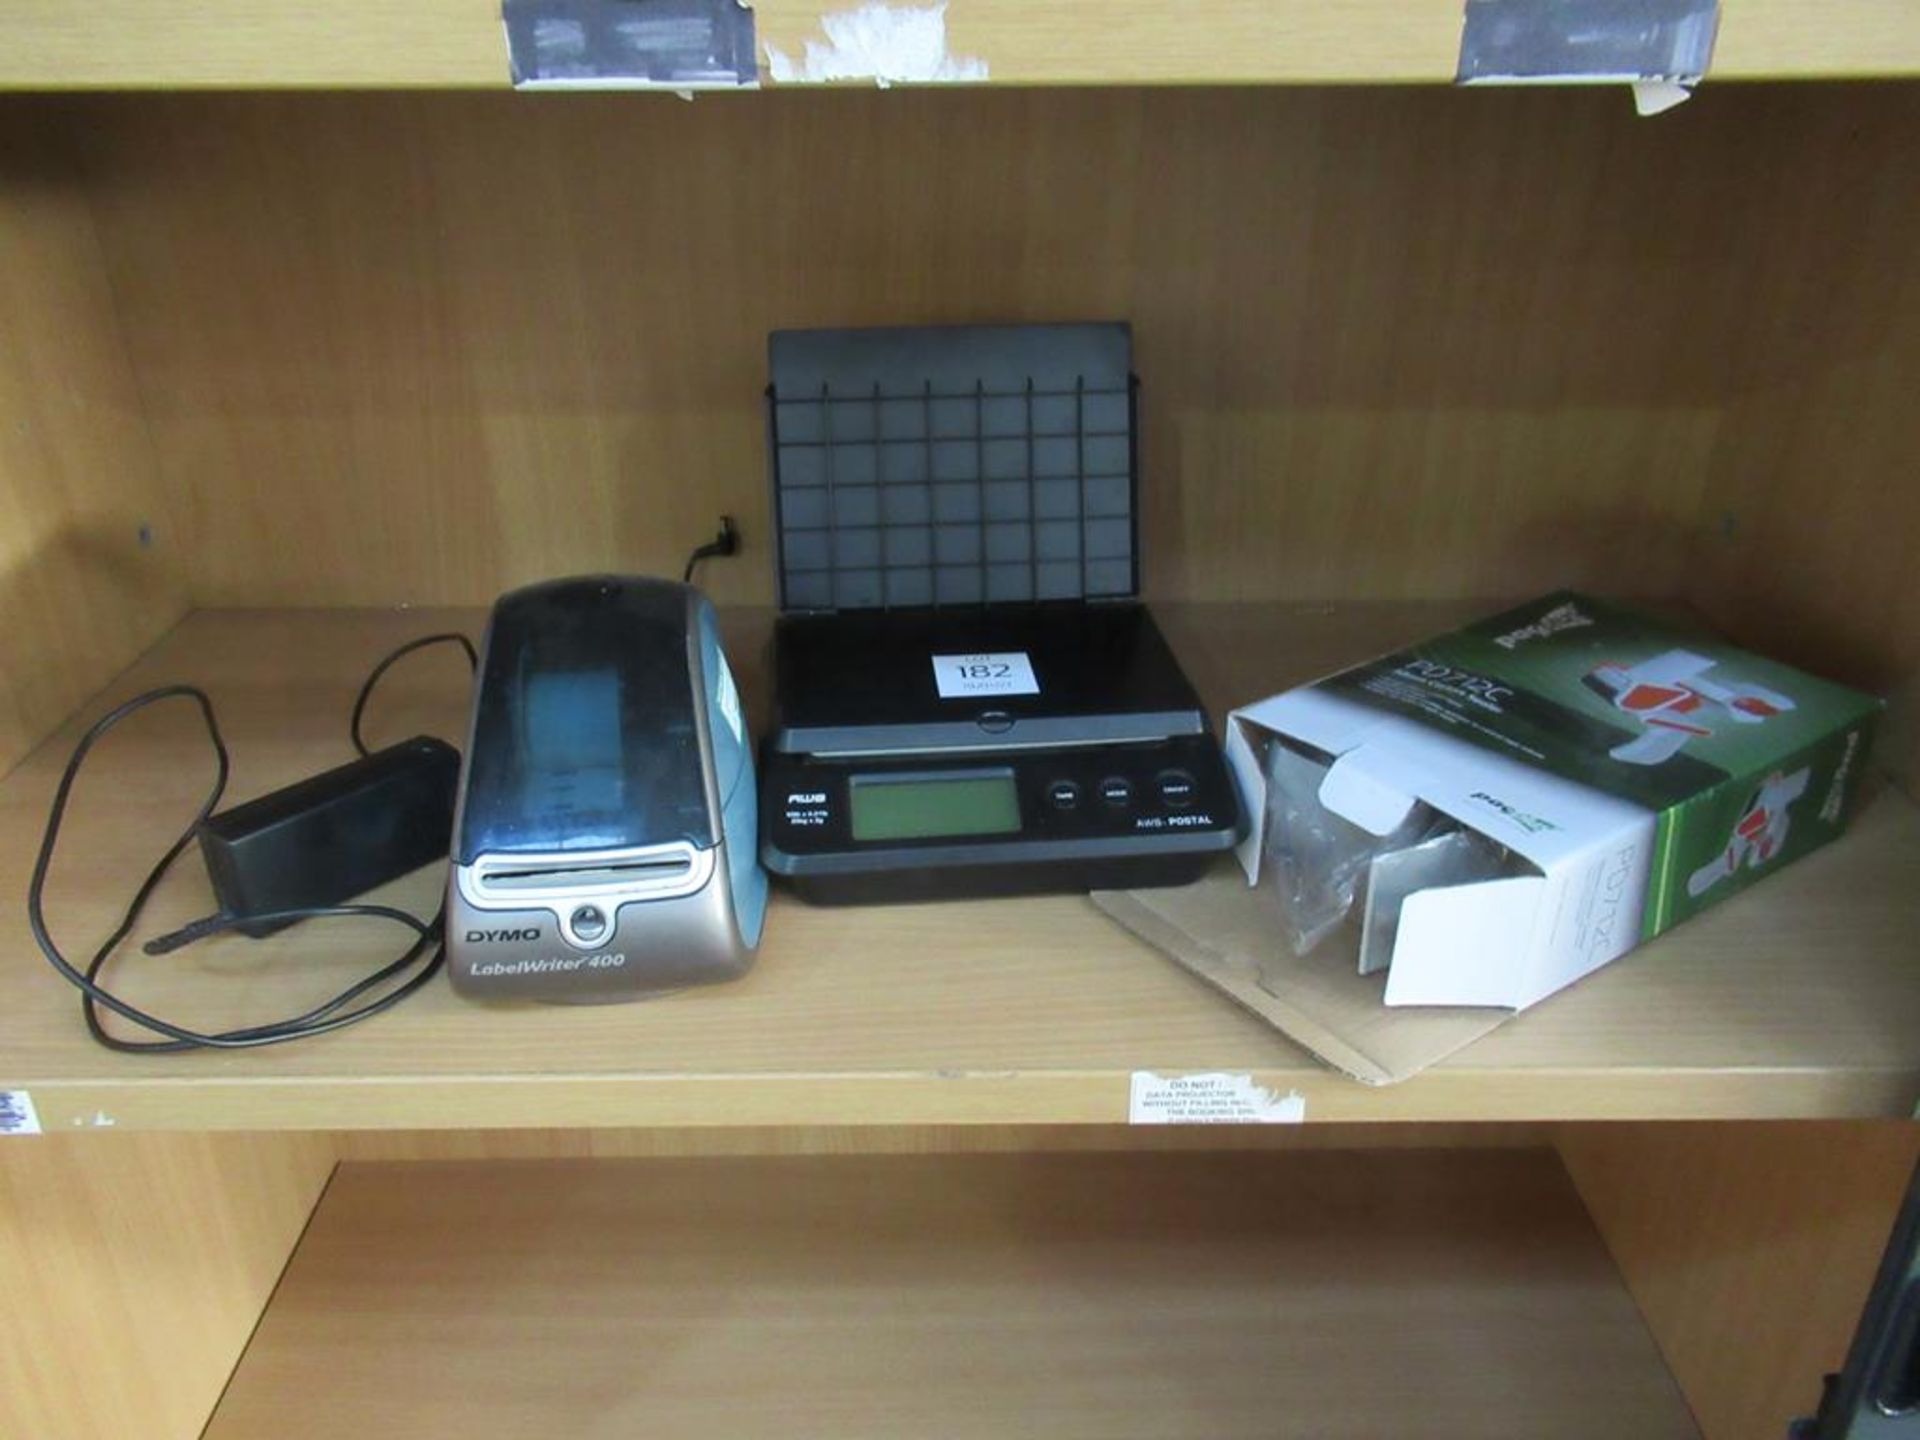 Dymo label writer 400, AWS scales and Pac plus sealer